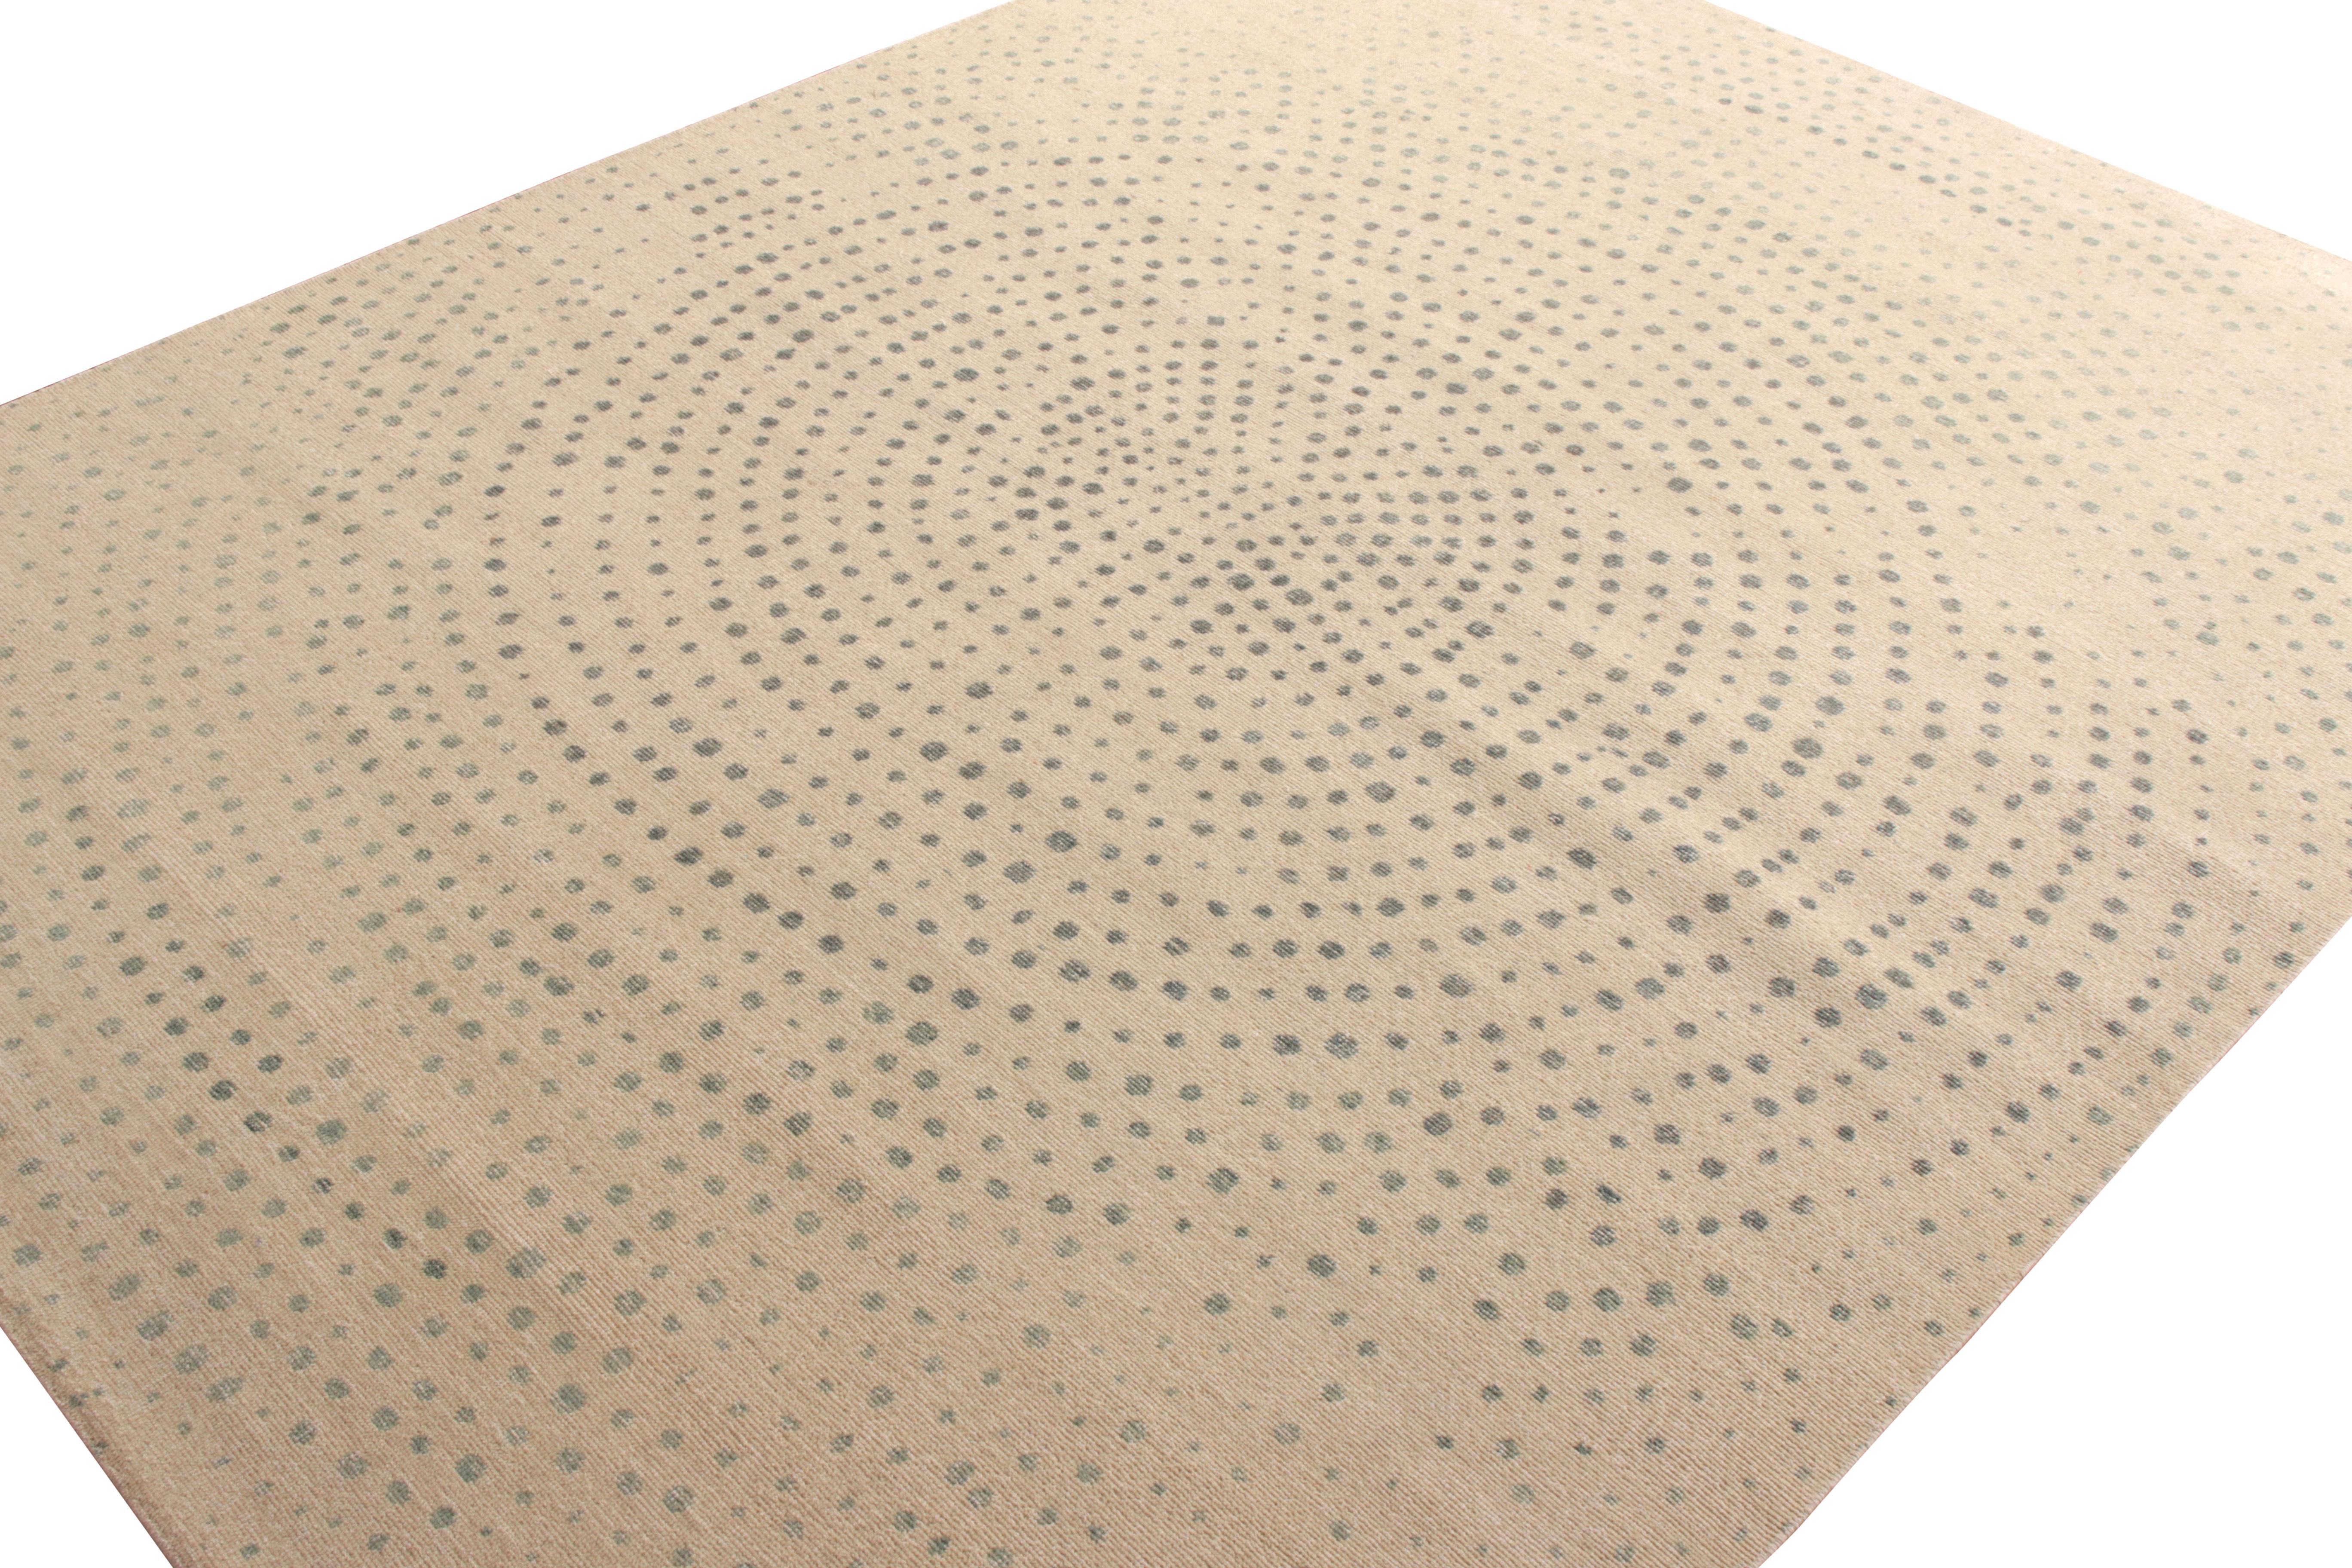 Other Rug & Kilim’s Distressed Style Rug in Beige, Gray Dots Pattern For Sale